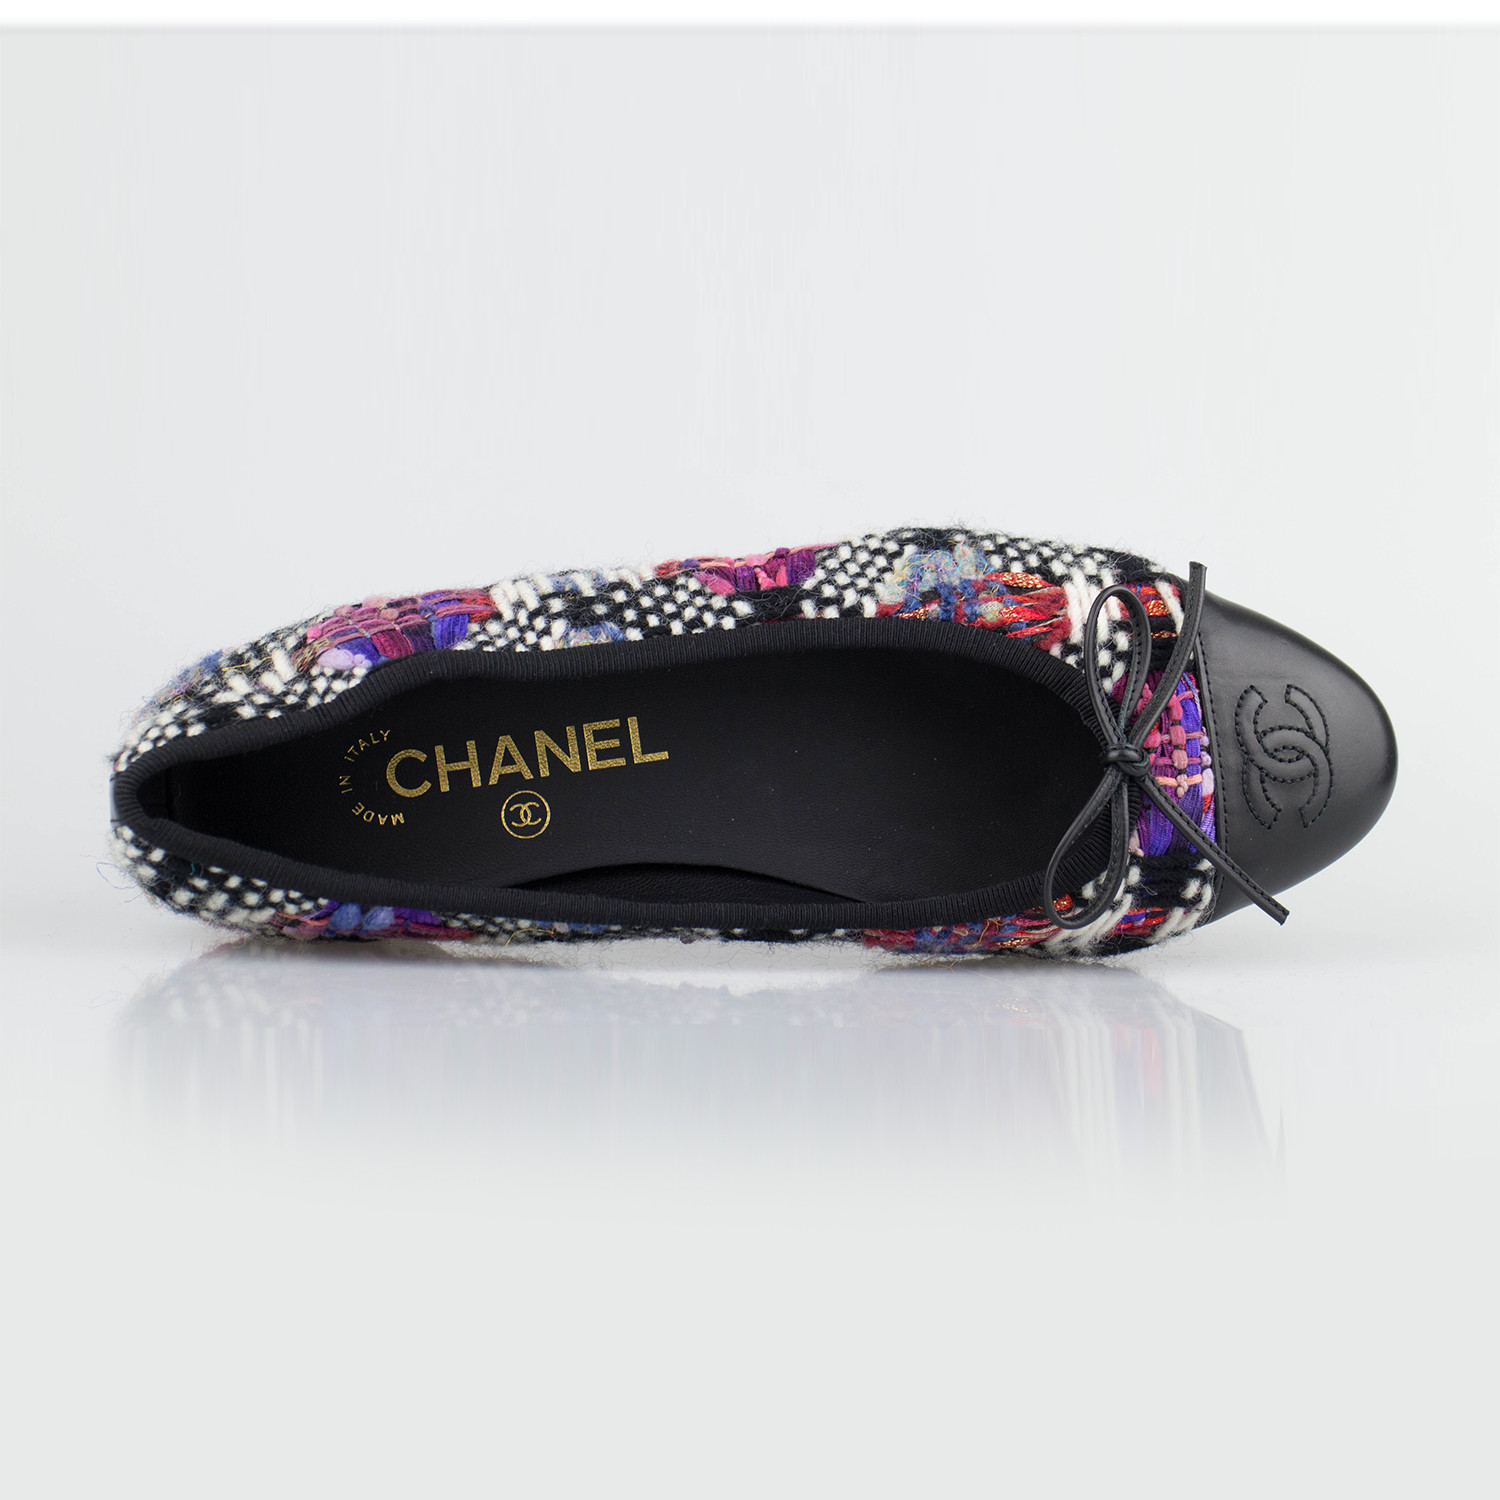 Chanel Tweed + Leather Cap Toe Ballerina Flats I // Multi-color (Euro: 37)  - Luxury Fashion - Touch of Modern